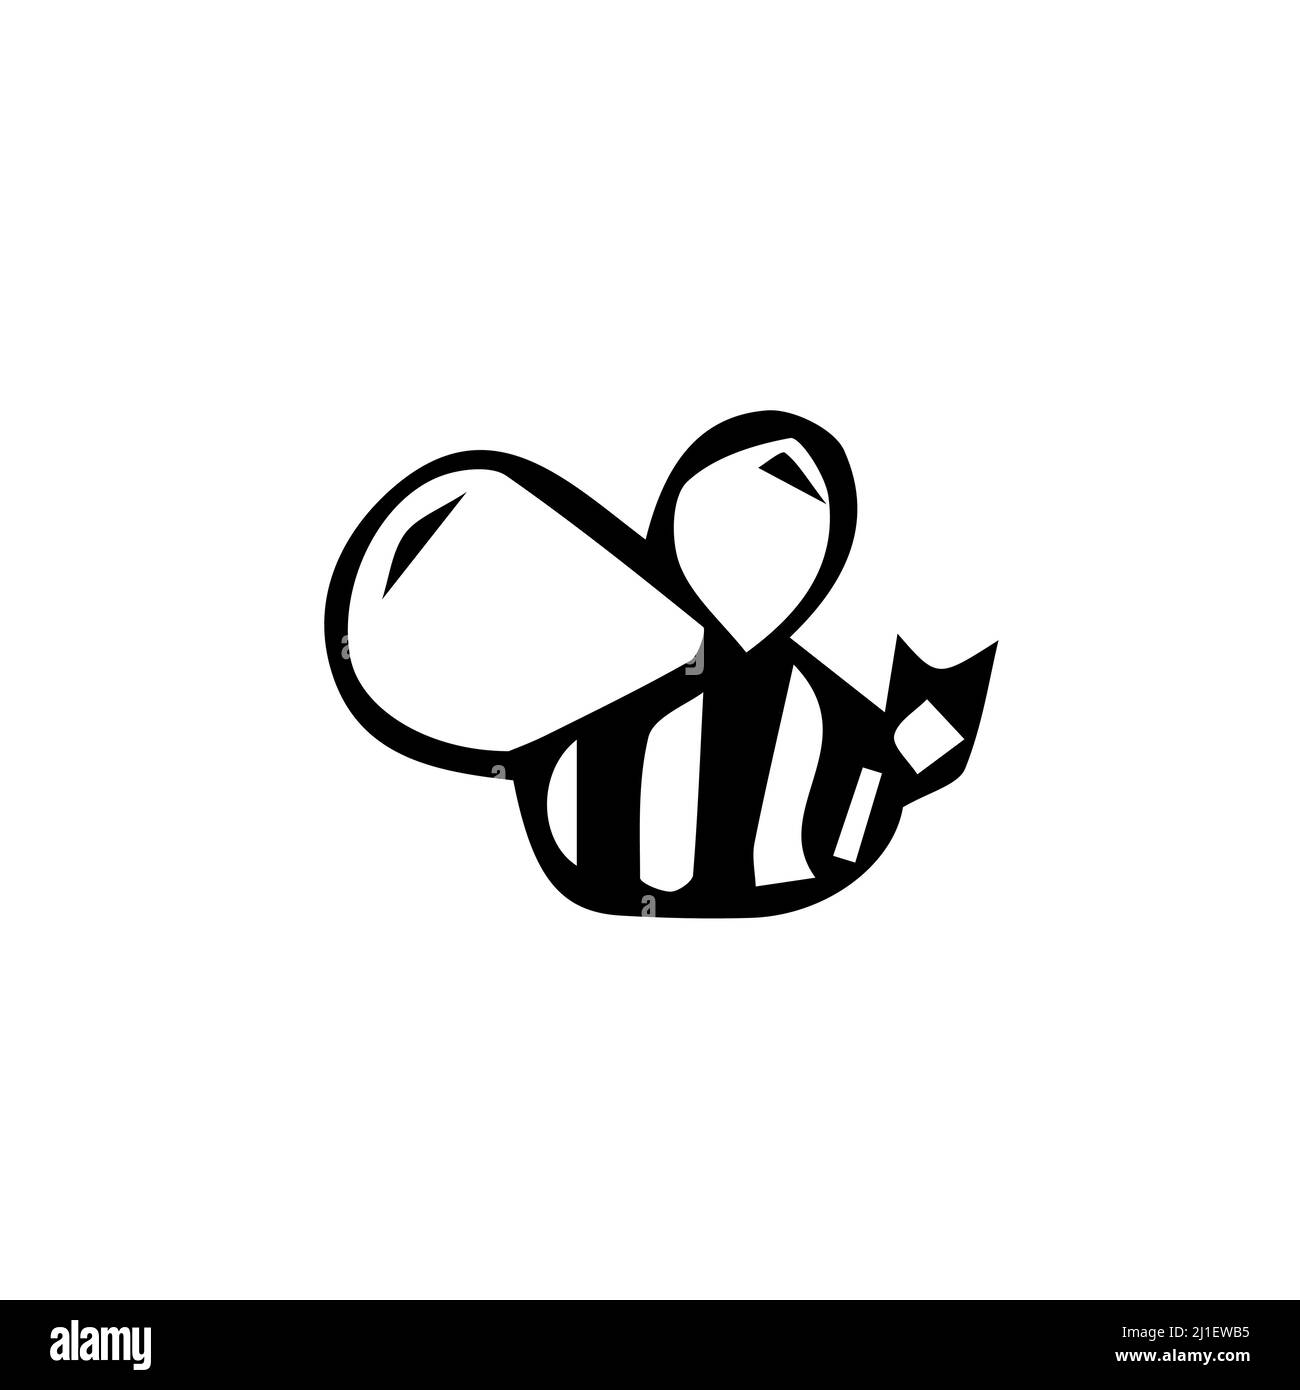 Doodle bees. Hand drawn illustration Stock Vector